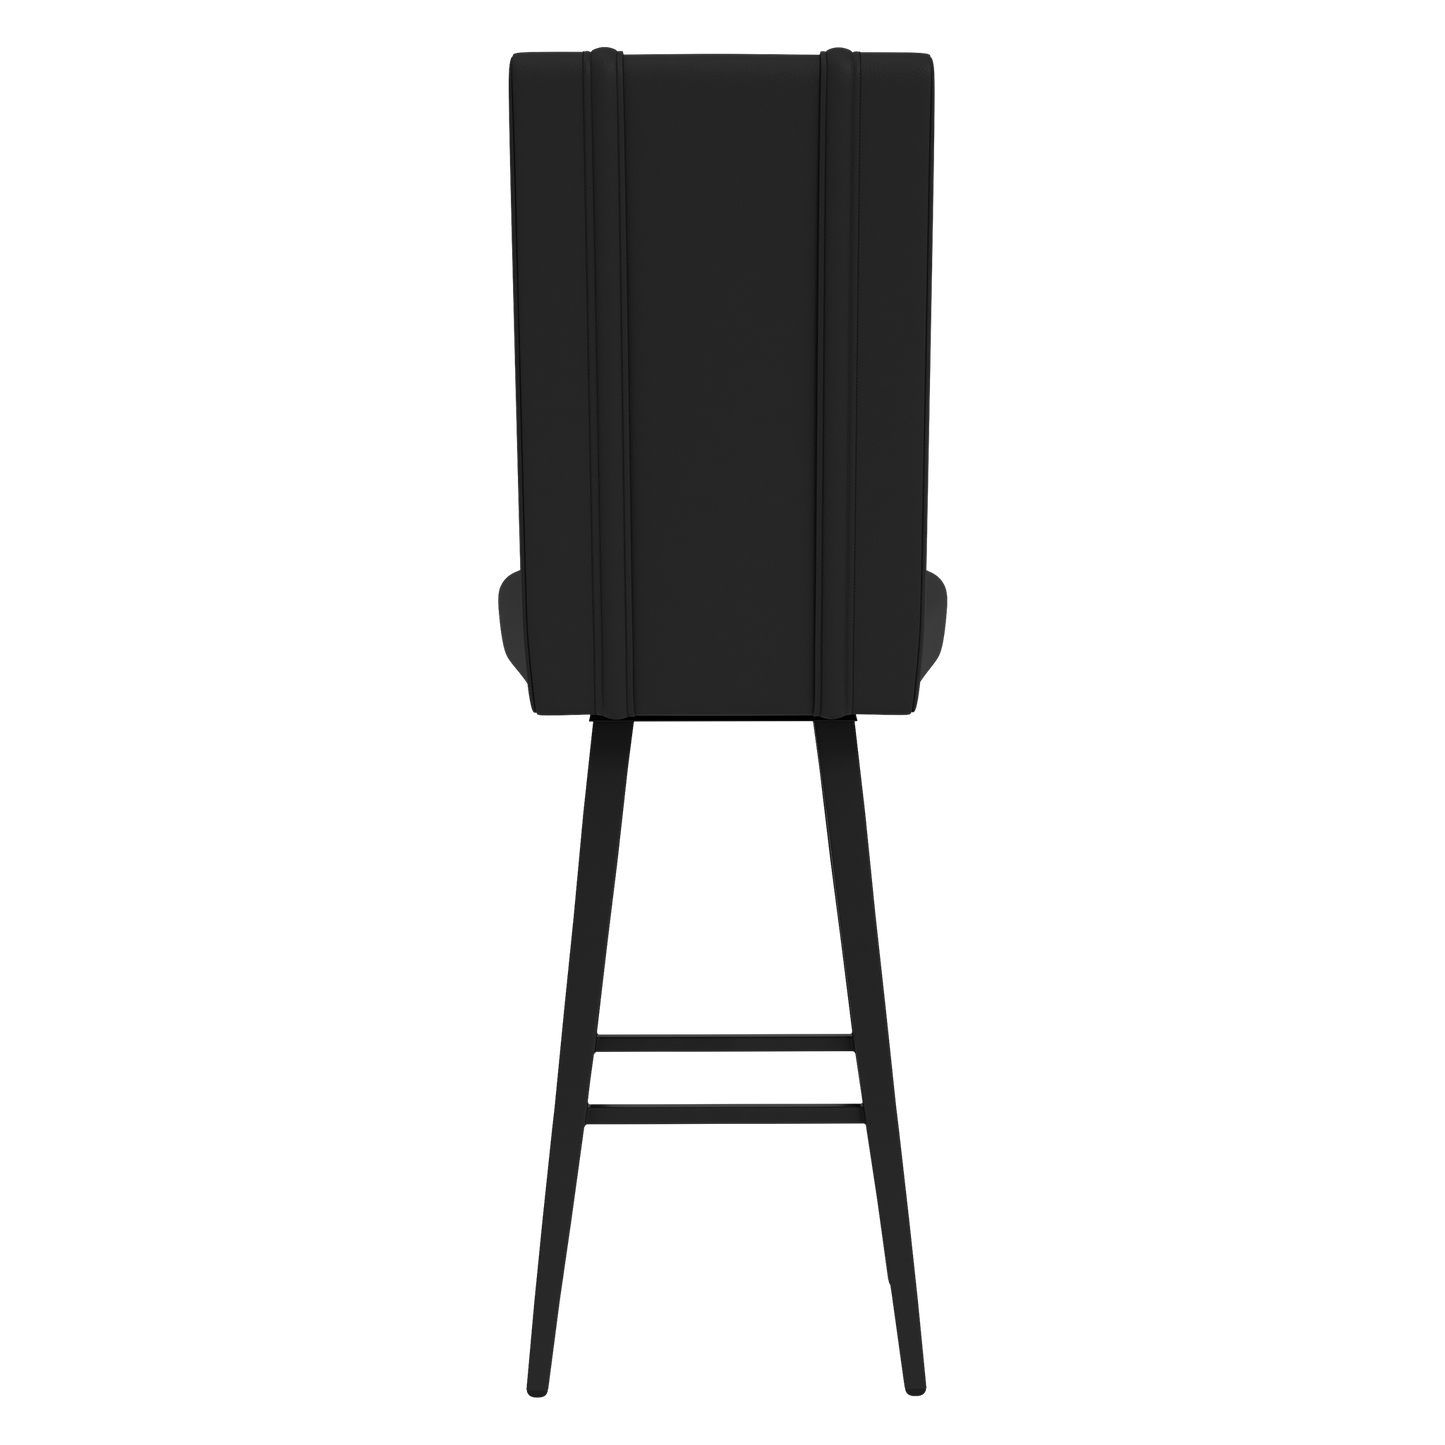 Swivel Bar Stool 2000 with Tampa Bay Buccaneers Classic Logo